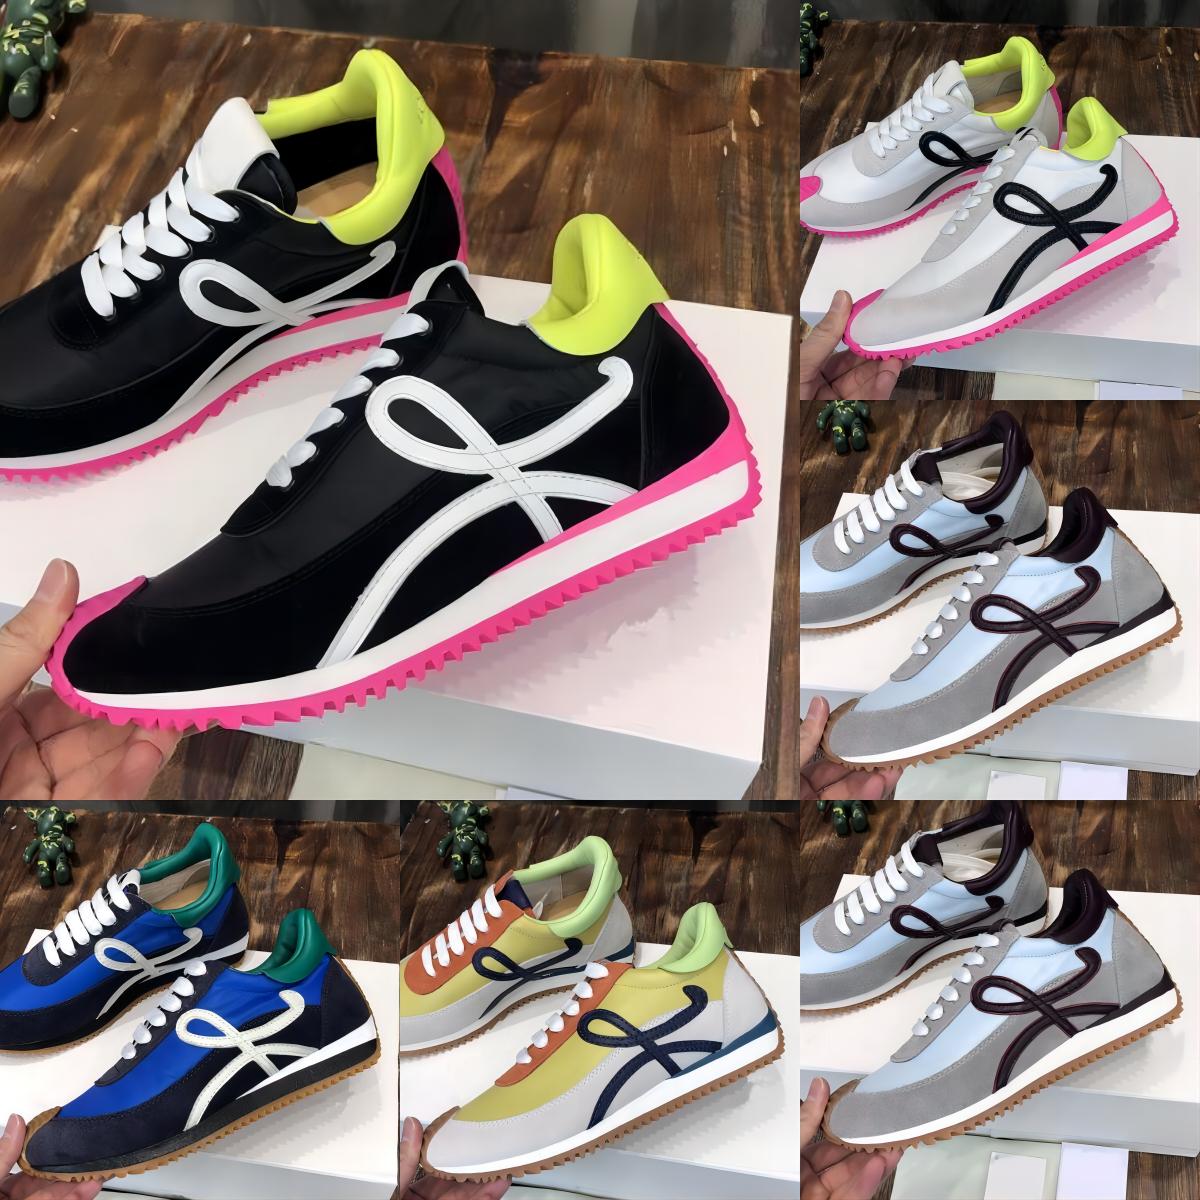 

2023 Flow Runner Sneakers Designer Mens Womens Loews Casual Shoes in Nylon Suede Sneaker Soft Upper Fashion Sport Ruuning Classic Shoe Top-Quality Size 35-45, Color 1